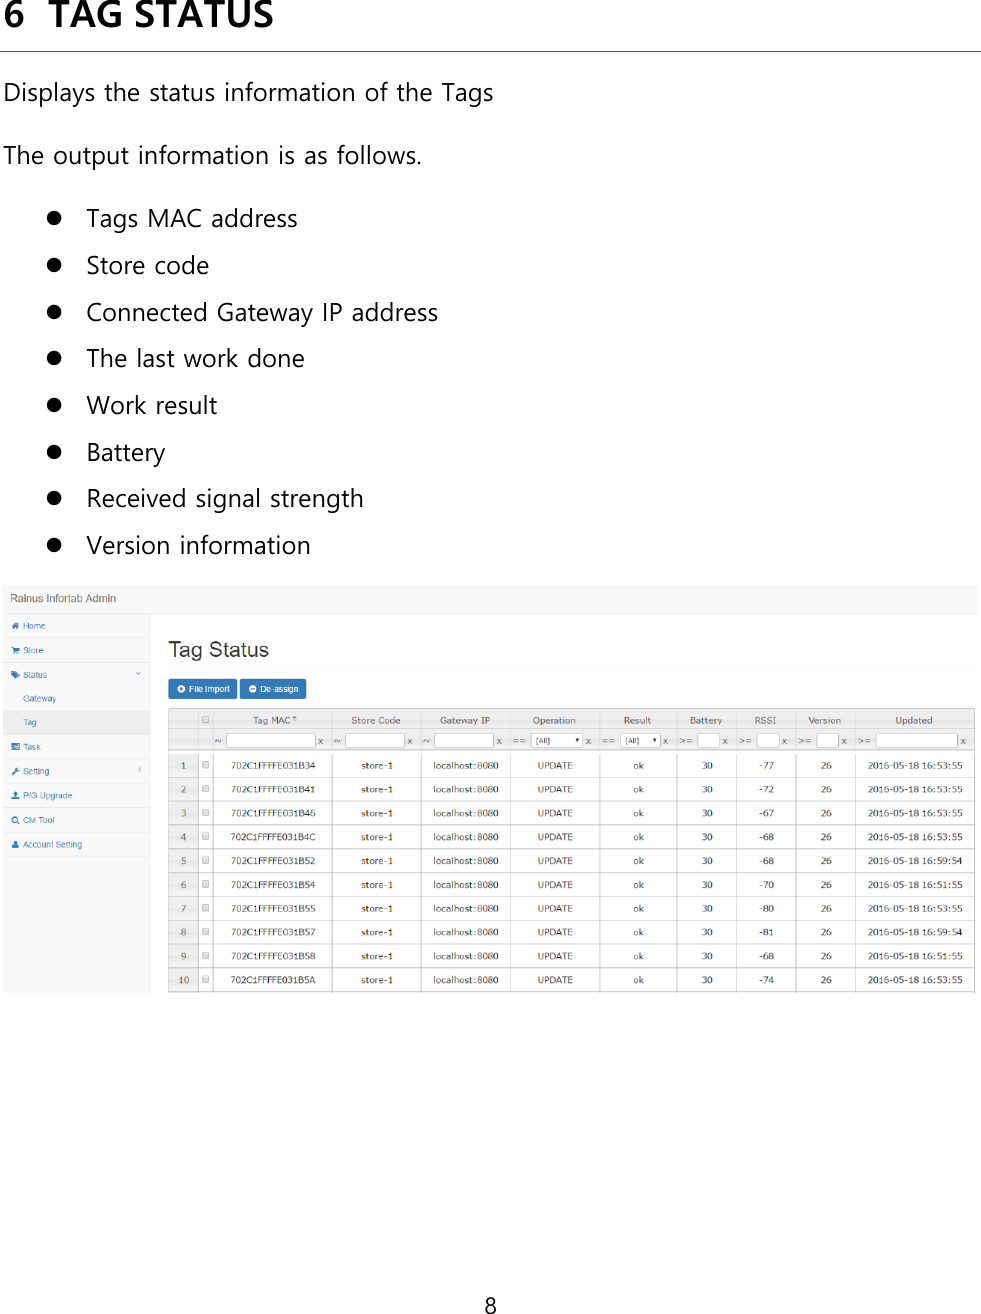 8  6 TAG STATUS Displays the status information of the Tags The output information is as follows. ⚫ Tags MAC address ⚫ Store code ⚫ Connected Gateway IP address ⚫ The last work done ⚫ Work result ⚫ Battery ⚫ Received signal strength ⚫ Version information    